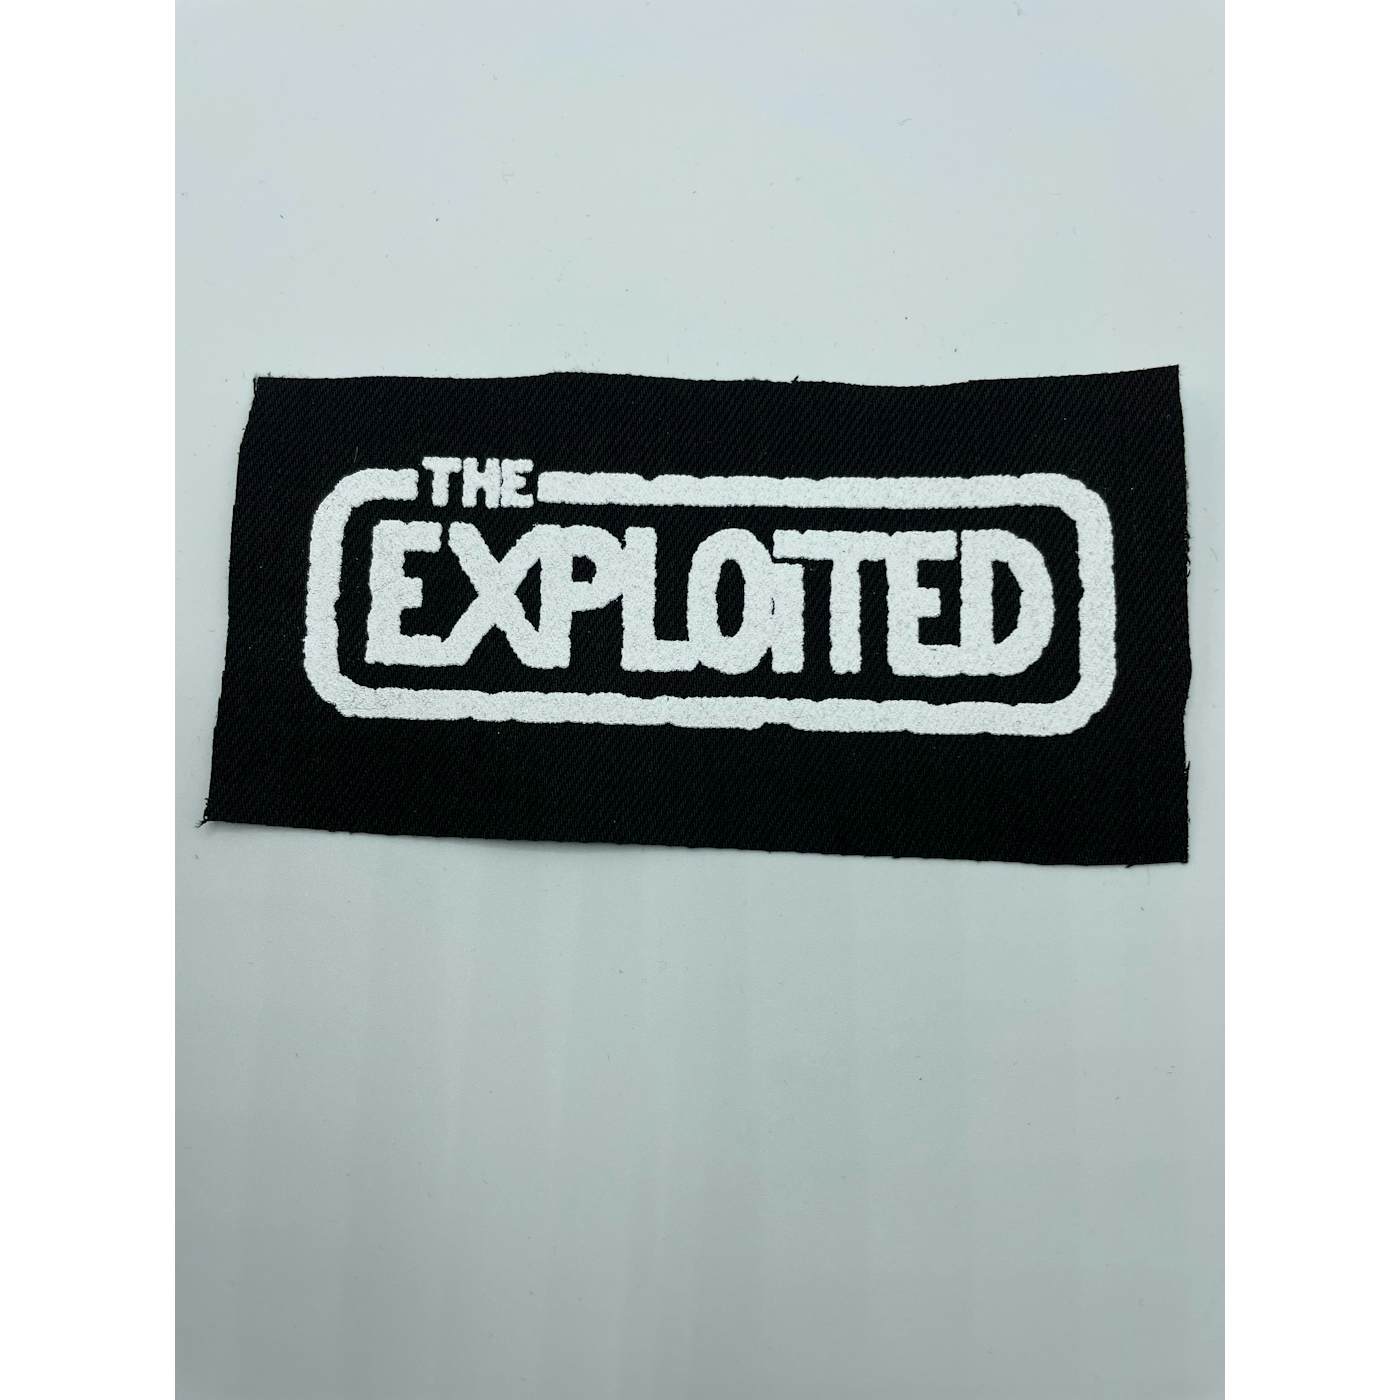 The Exploited "Logo" Patch